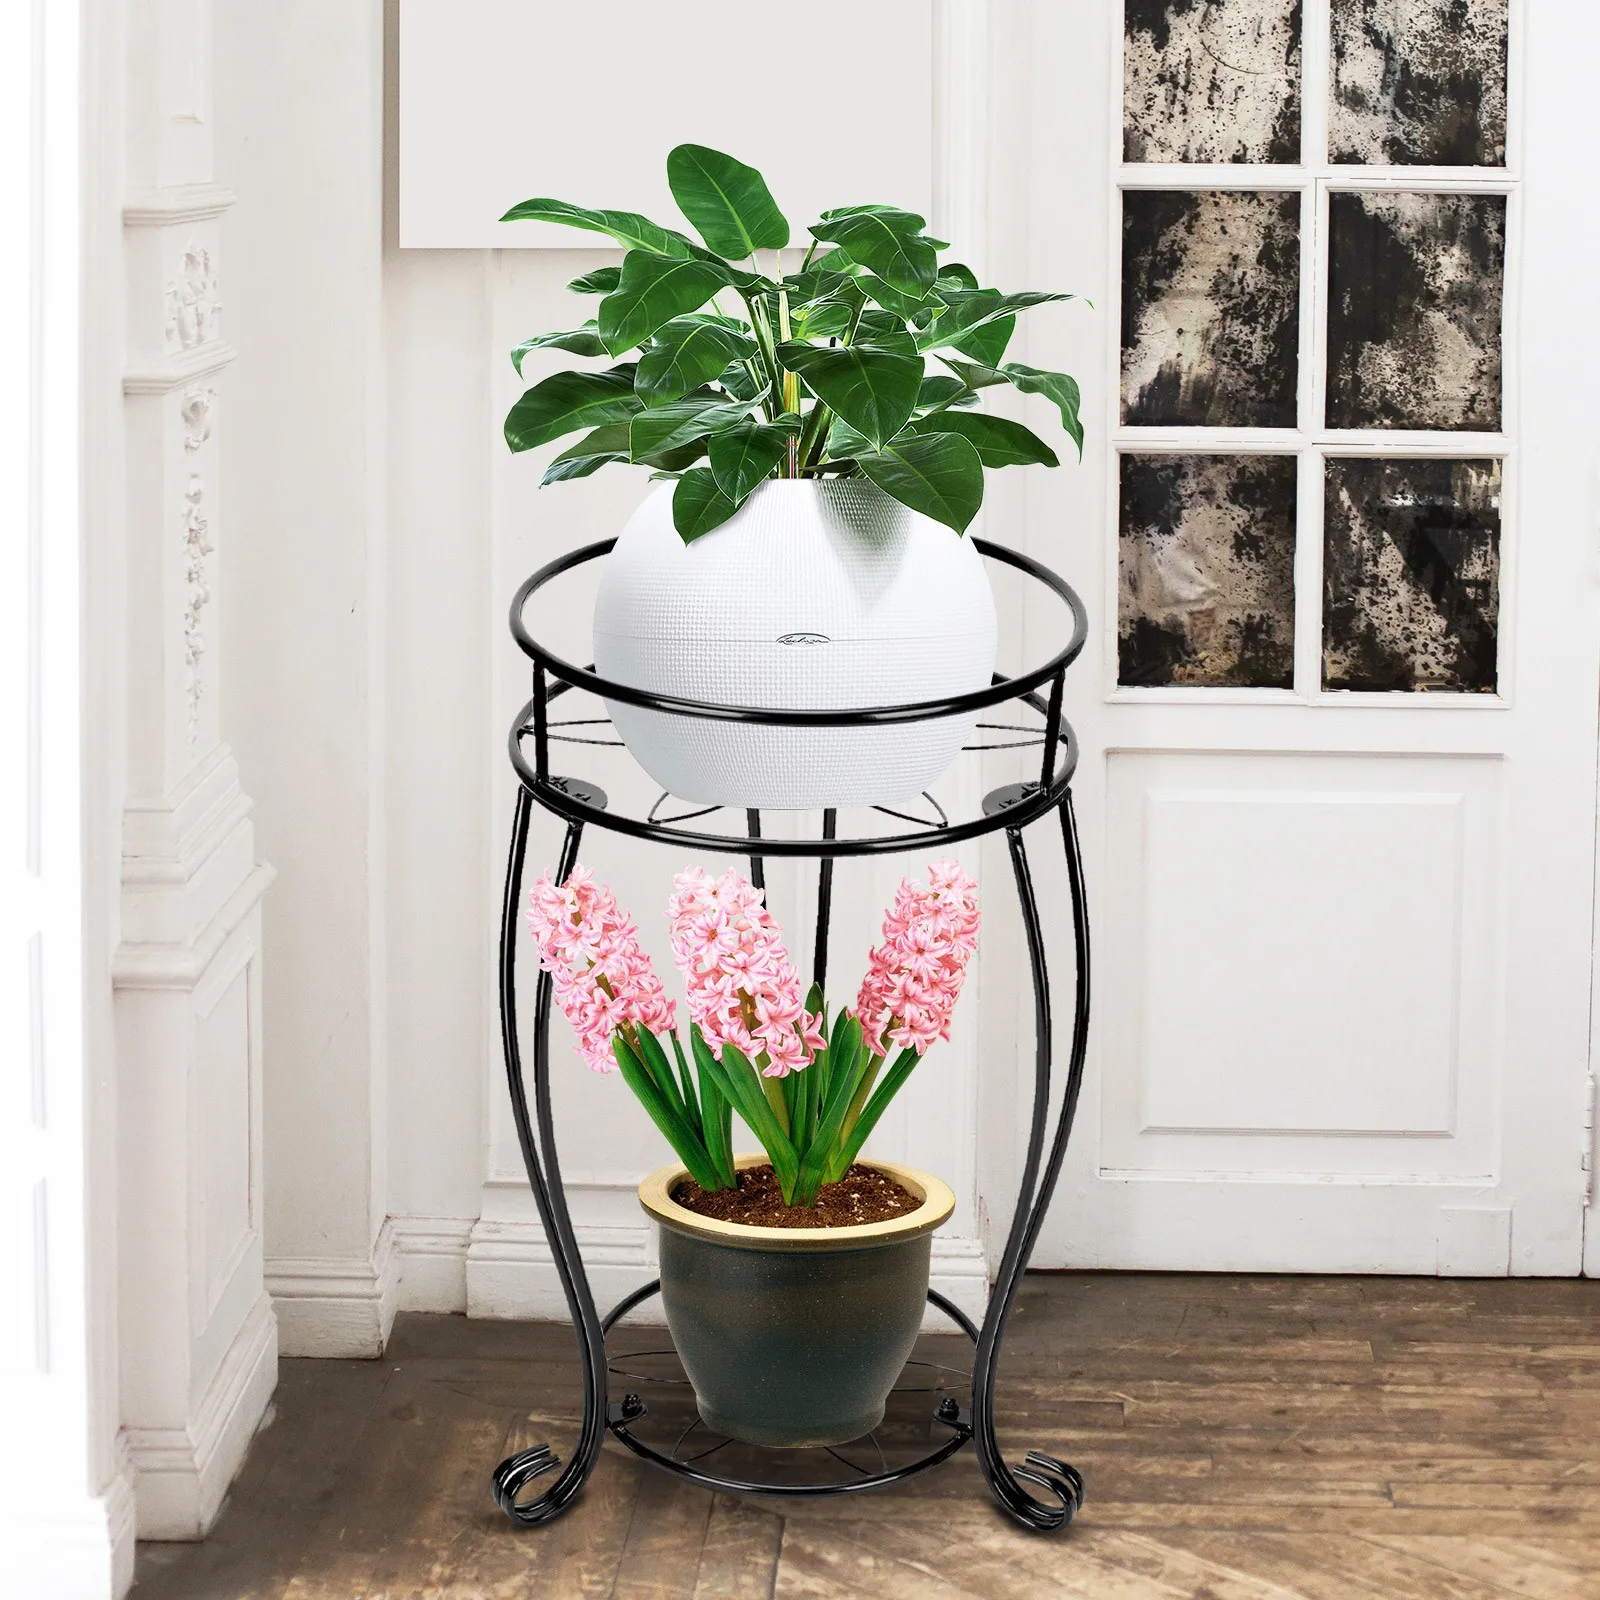 

Porch Indoor Tier Round Stand Garden Metal 19.3 Container Container 2 Tall Stand Supports Outdoor Rackfor Roll up Sink Rack 18